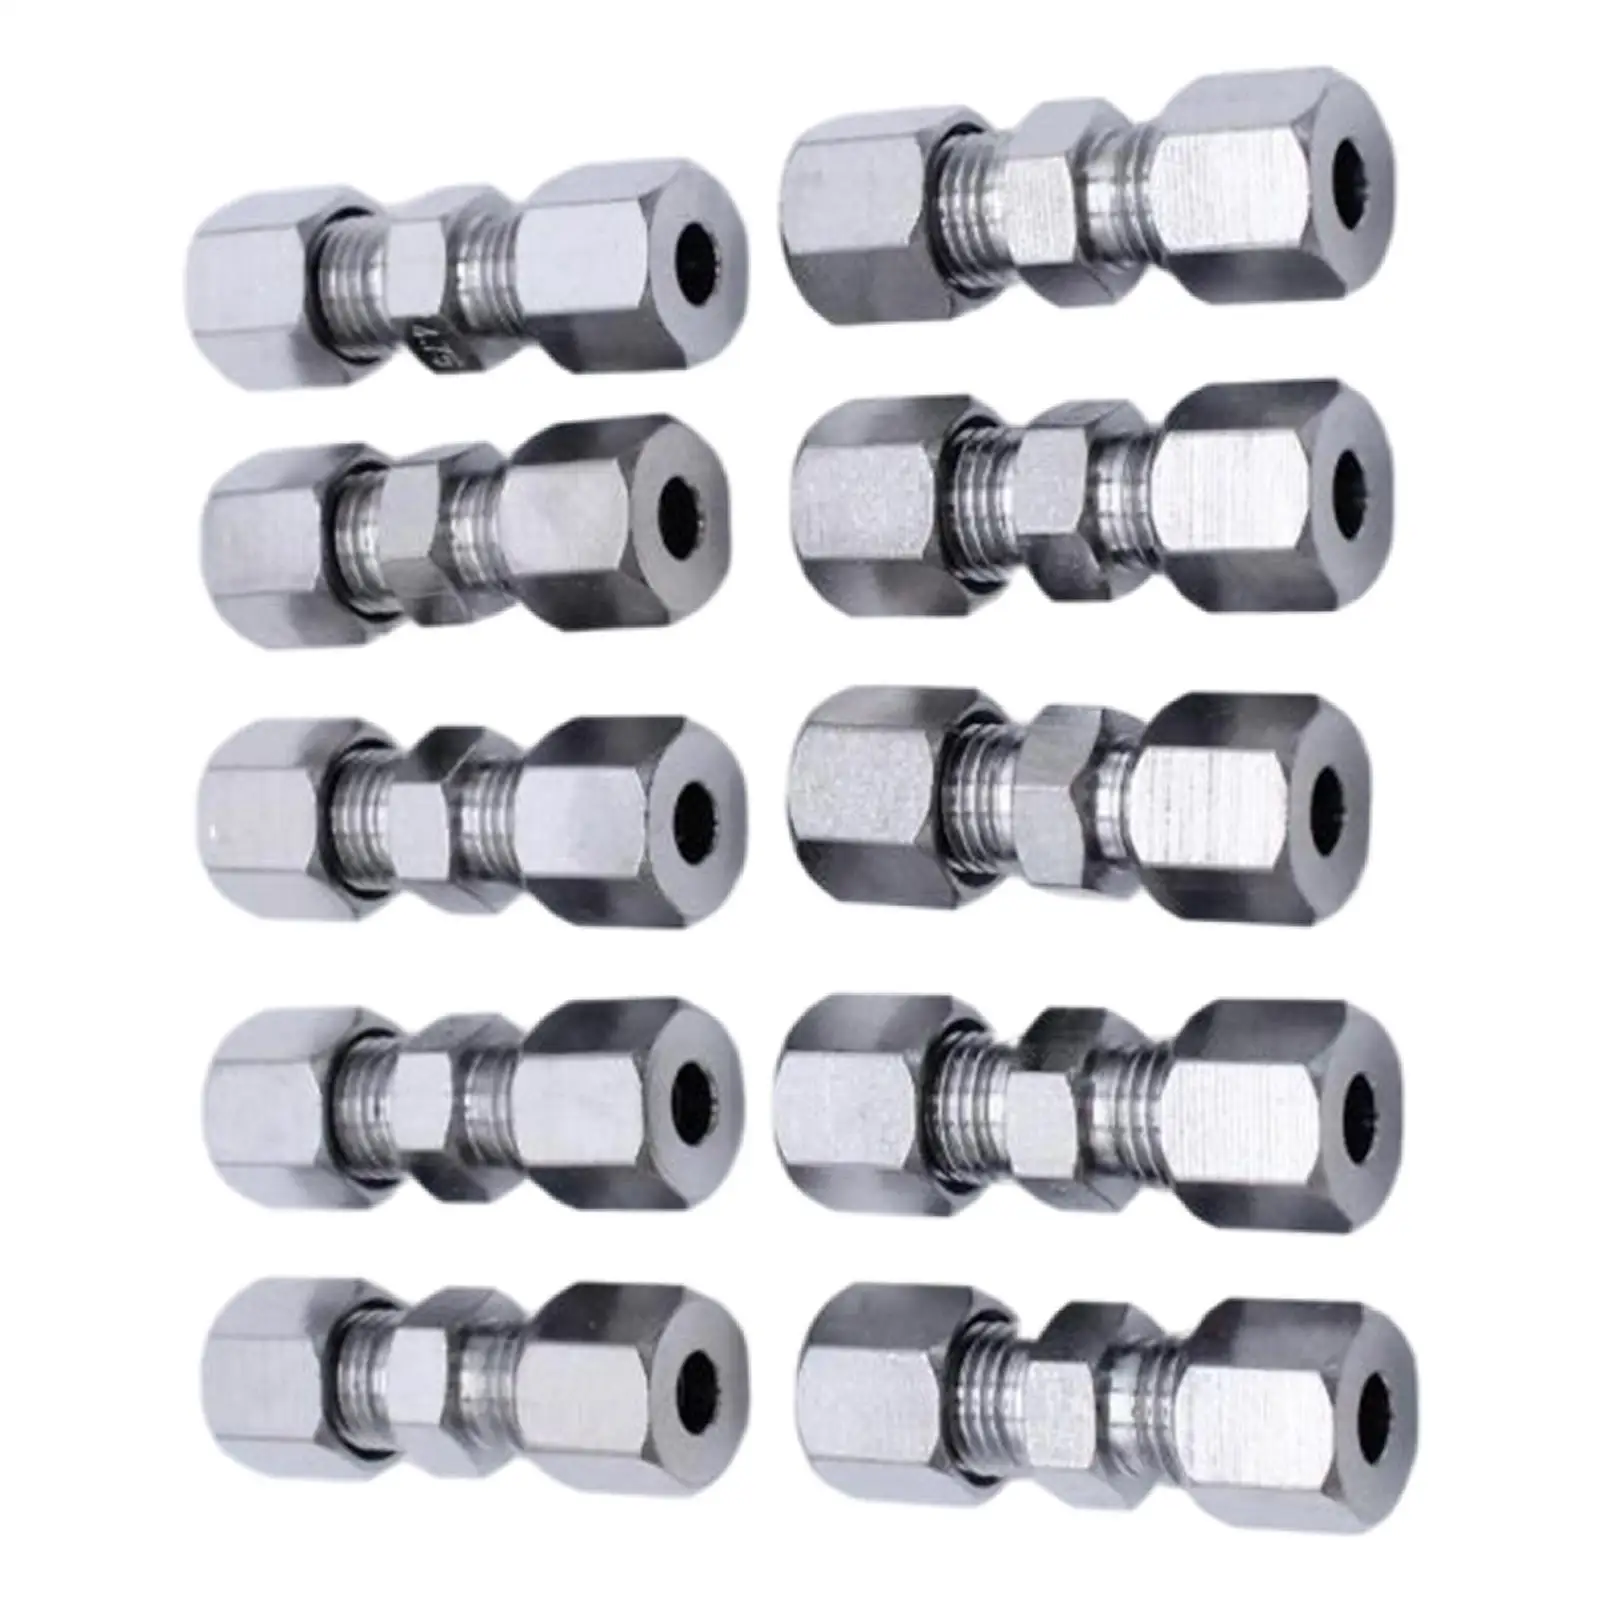 Brake Line Connector 3/16 inch Fittings Assortment 10Pcs Compression Union Adapter Fits for 3/16 inch Tube 4.75mm Brake Line